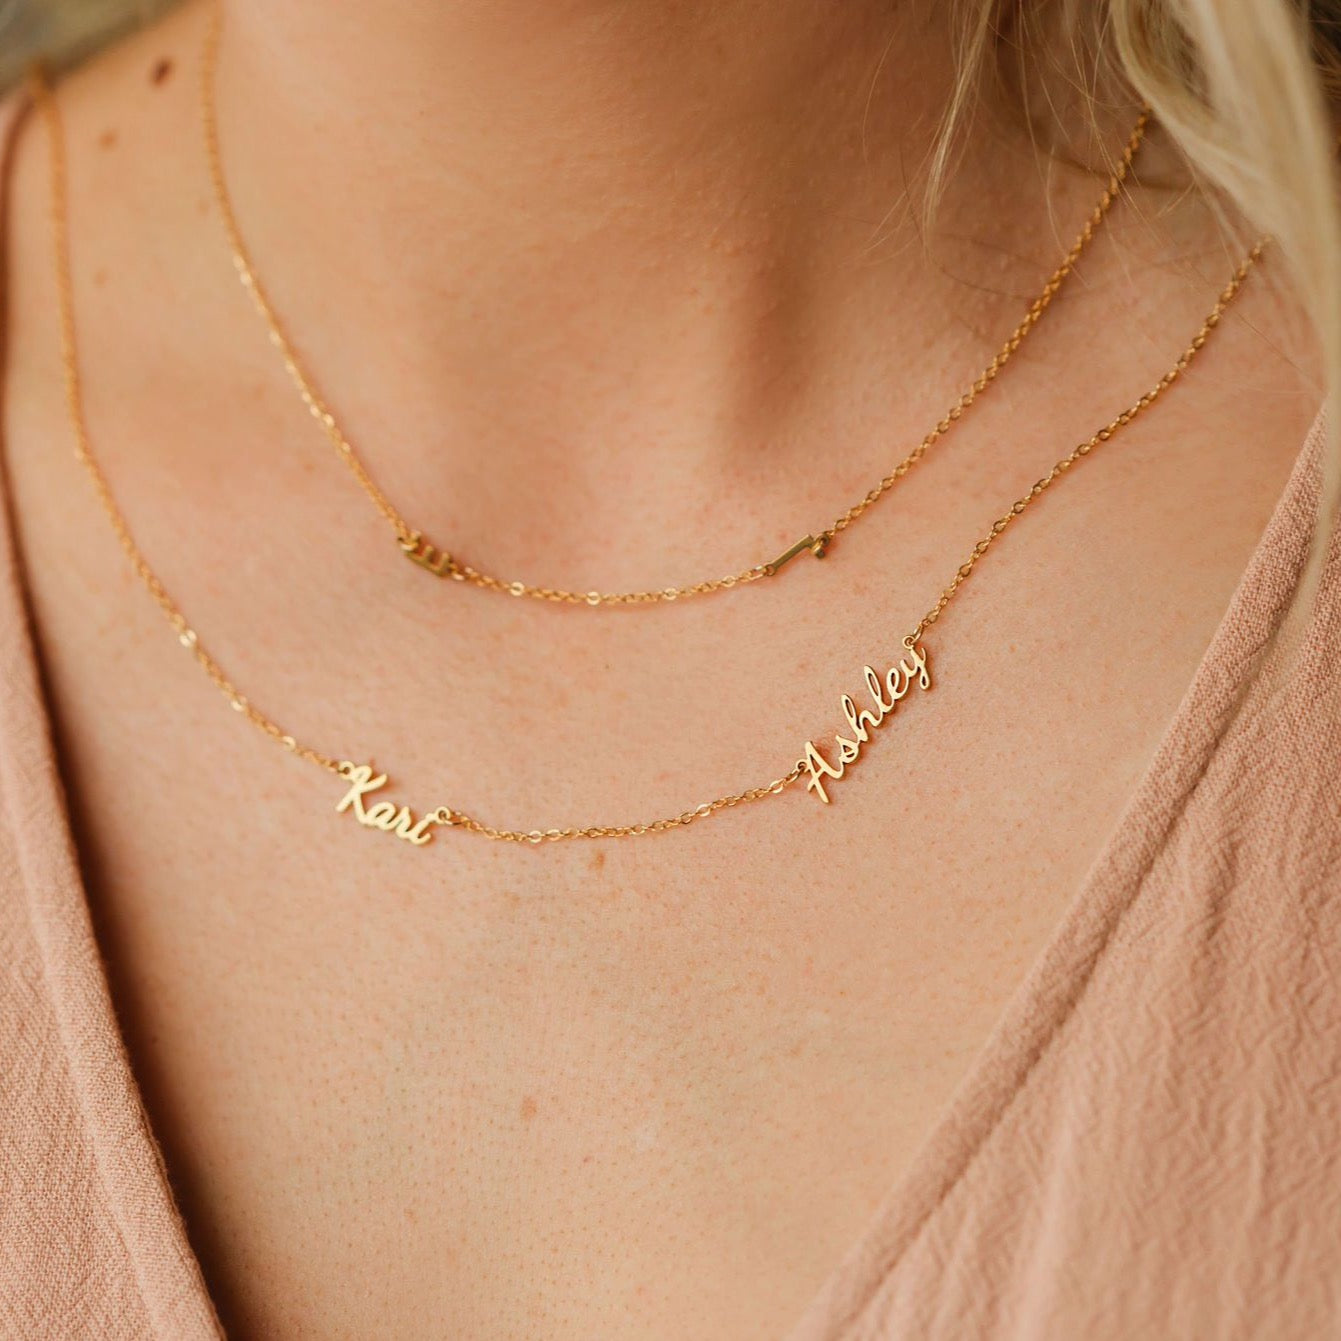 multiple name necklace layered with side initial letter necklace